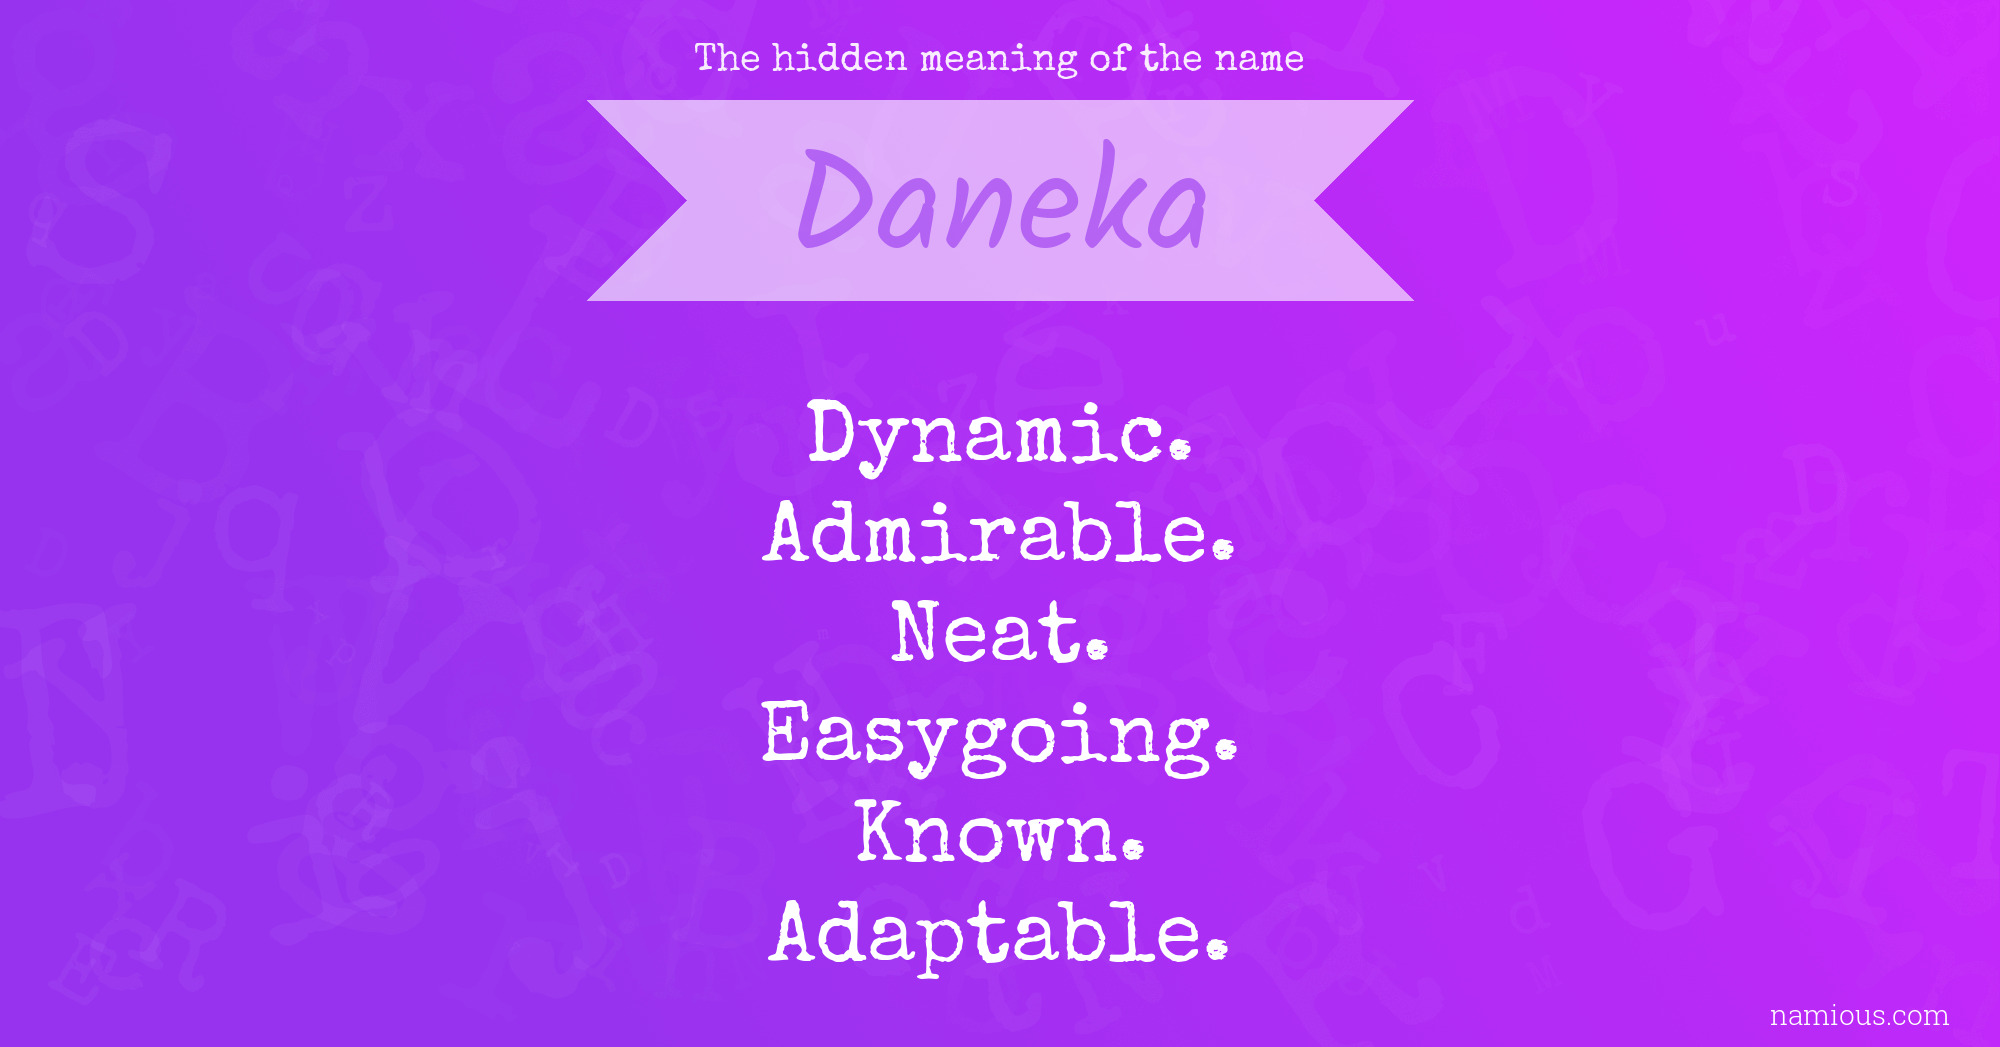 The hidden meaning of the name Daneka